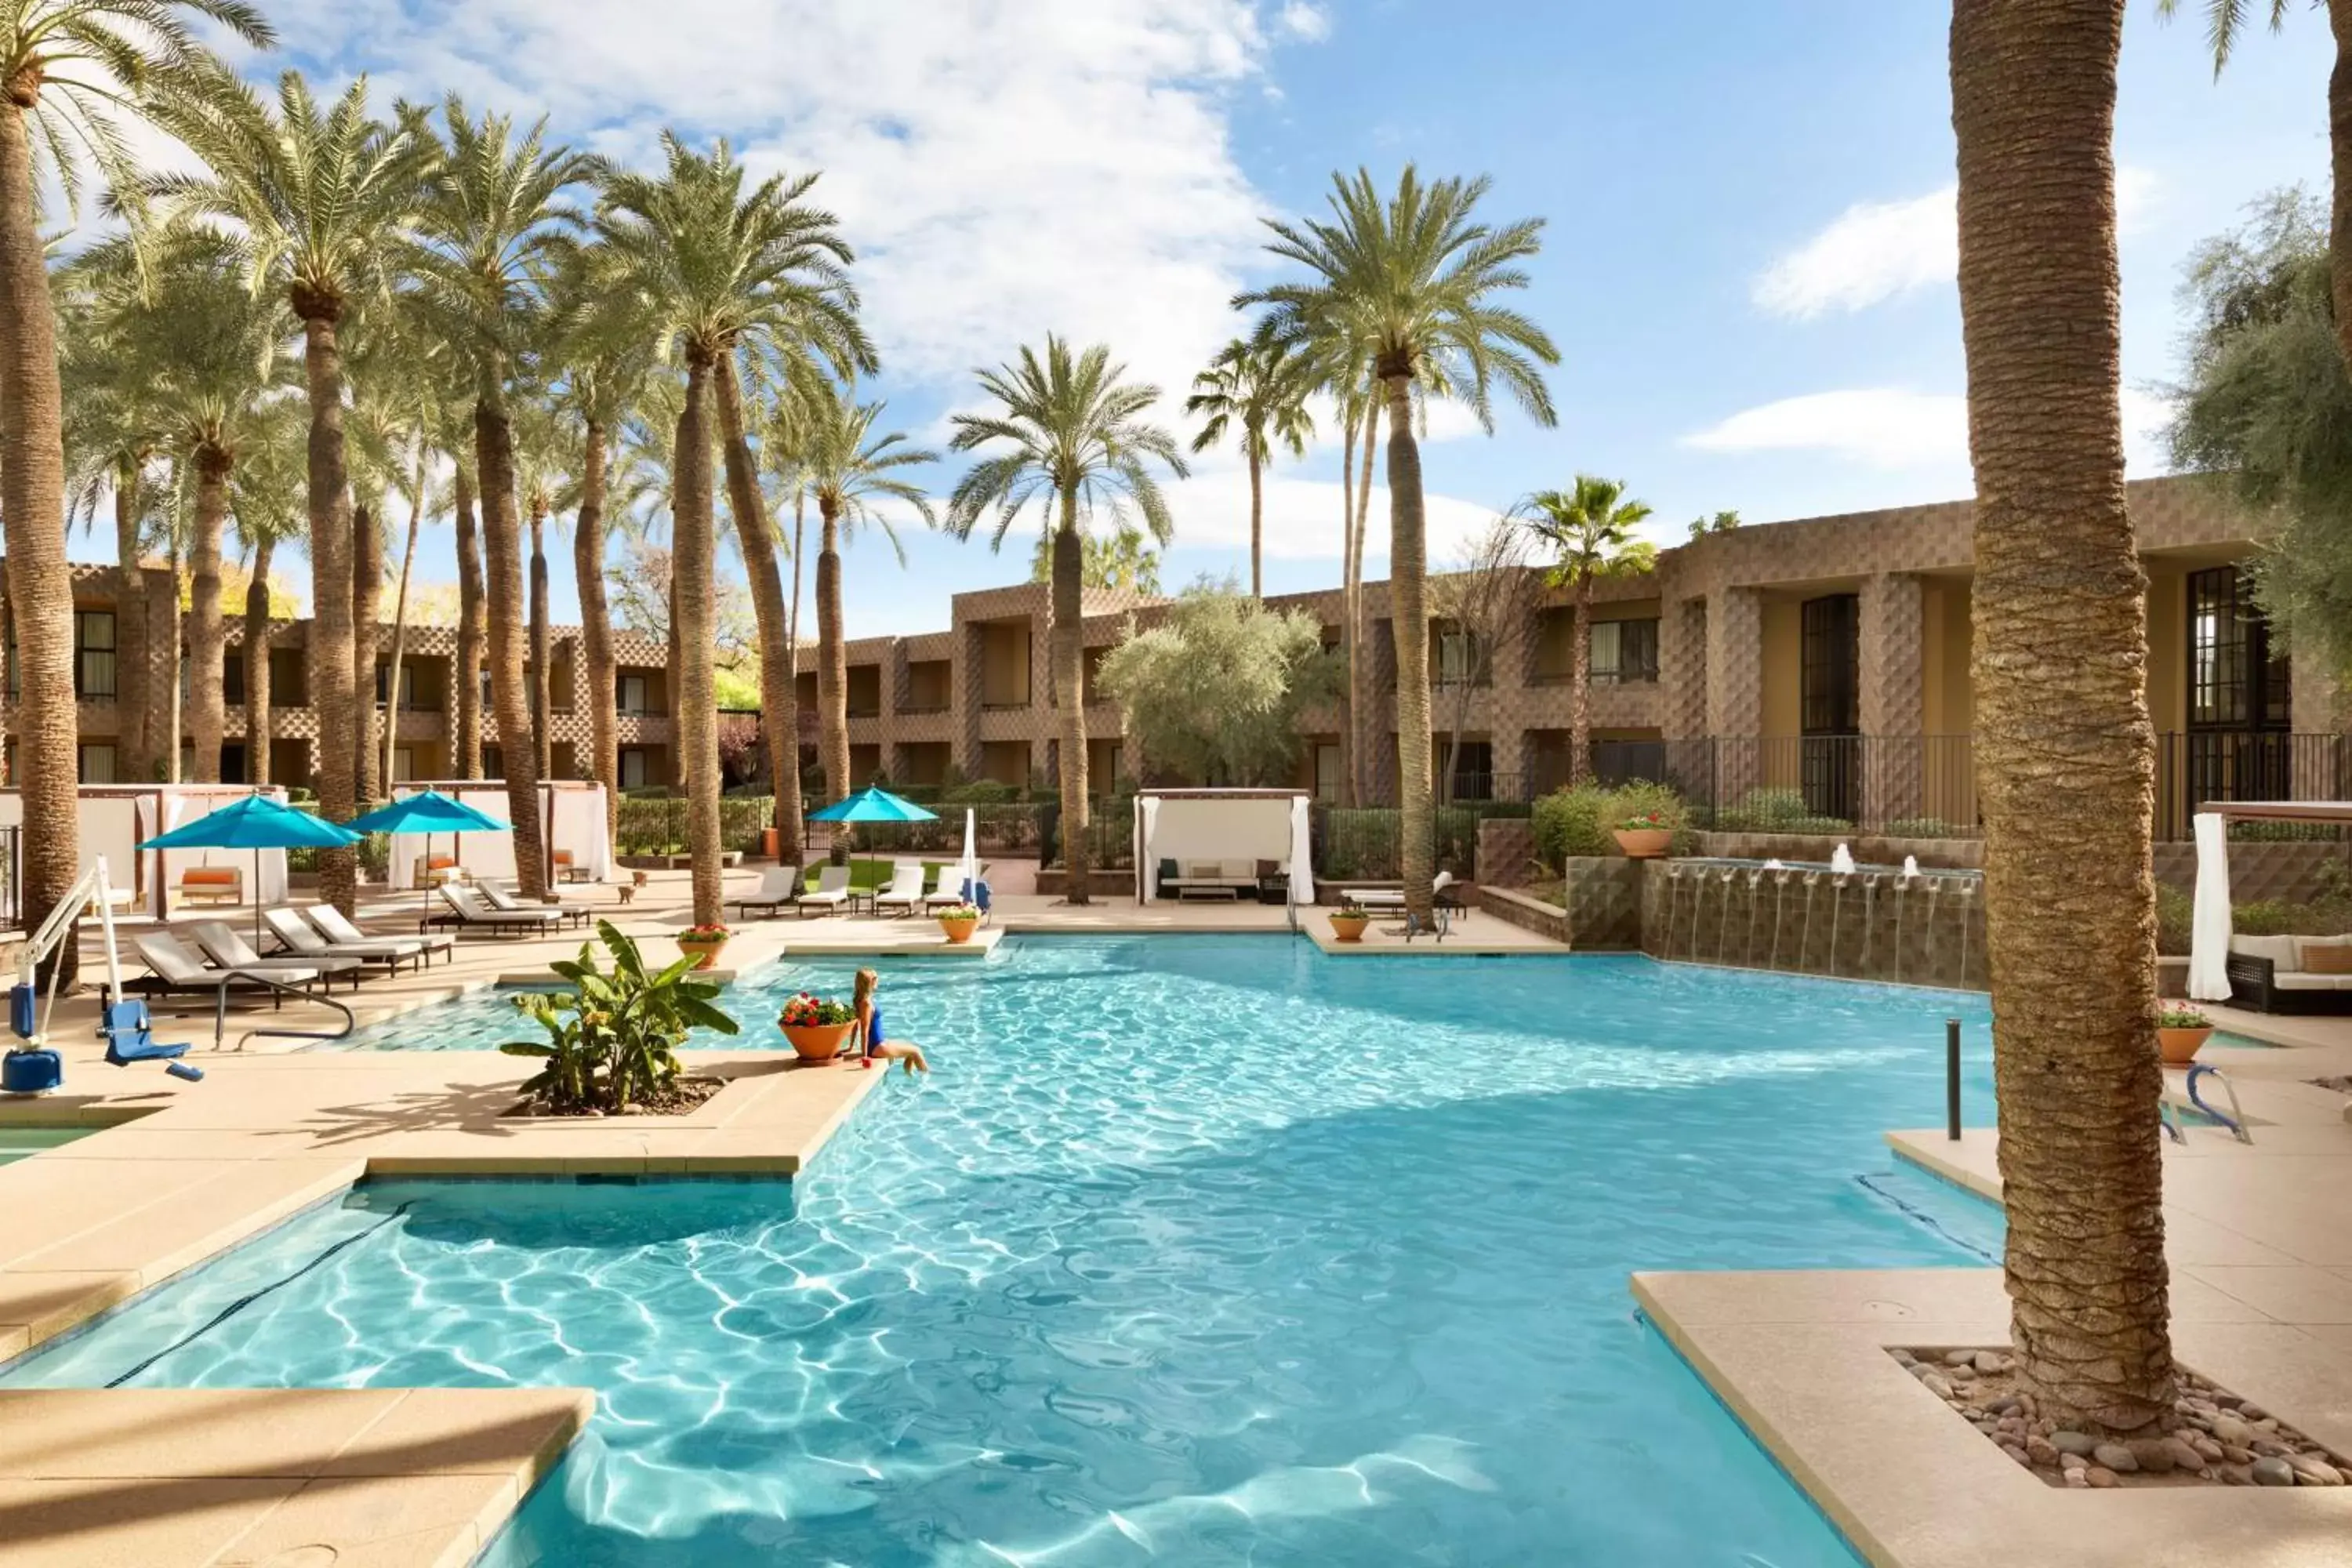 Property building, Swimming Pool in DoubleTree by Hilton Paradise Valley Resort Scottsdale